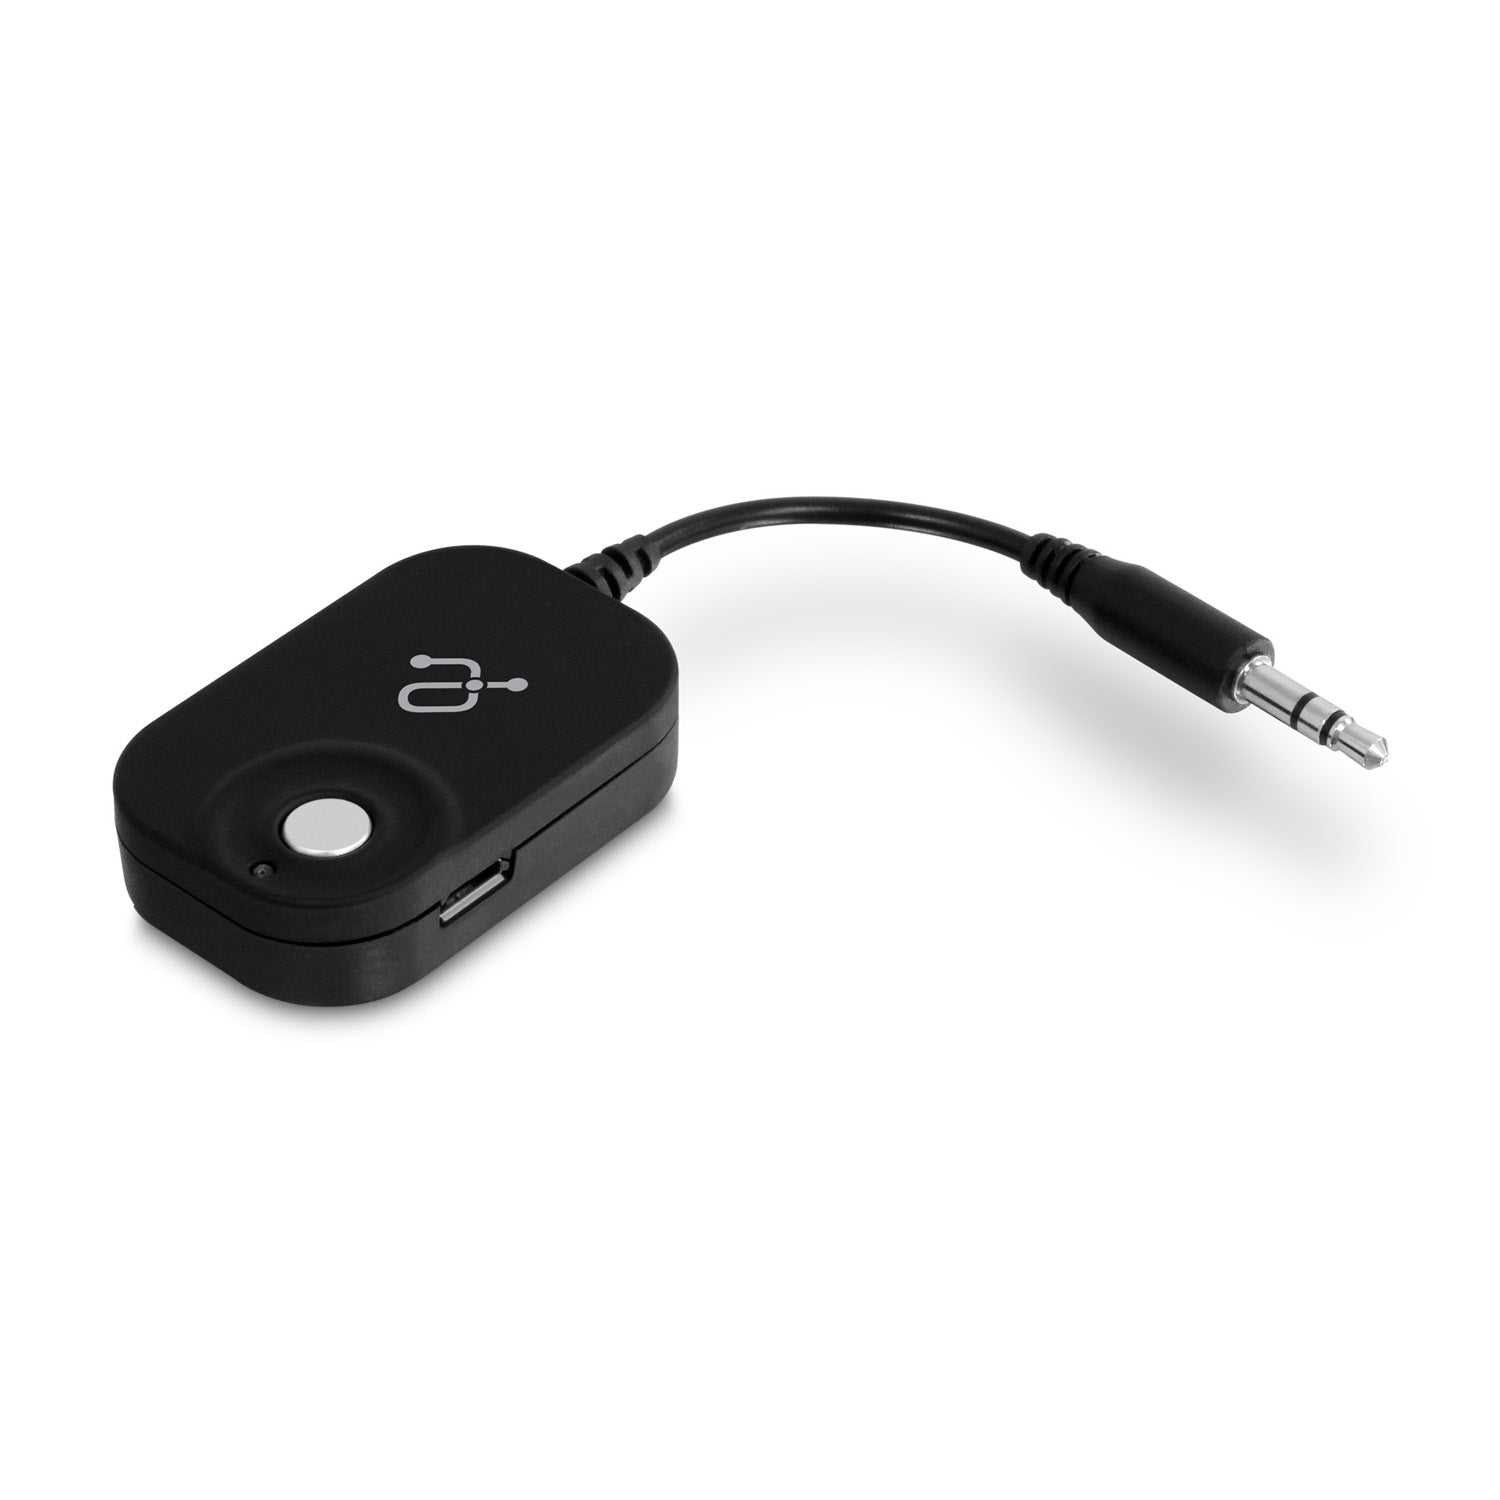 [2023 version] Bluetooth Aux Receiver for Car with Dust Pouch, Portable  3.5mm Aux Bluetooth 5.0 Adapter/Wireless Audio Receiver for Car Stereo/Home